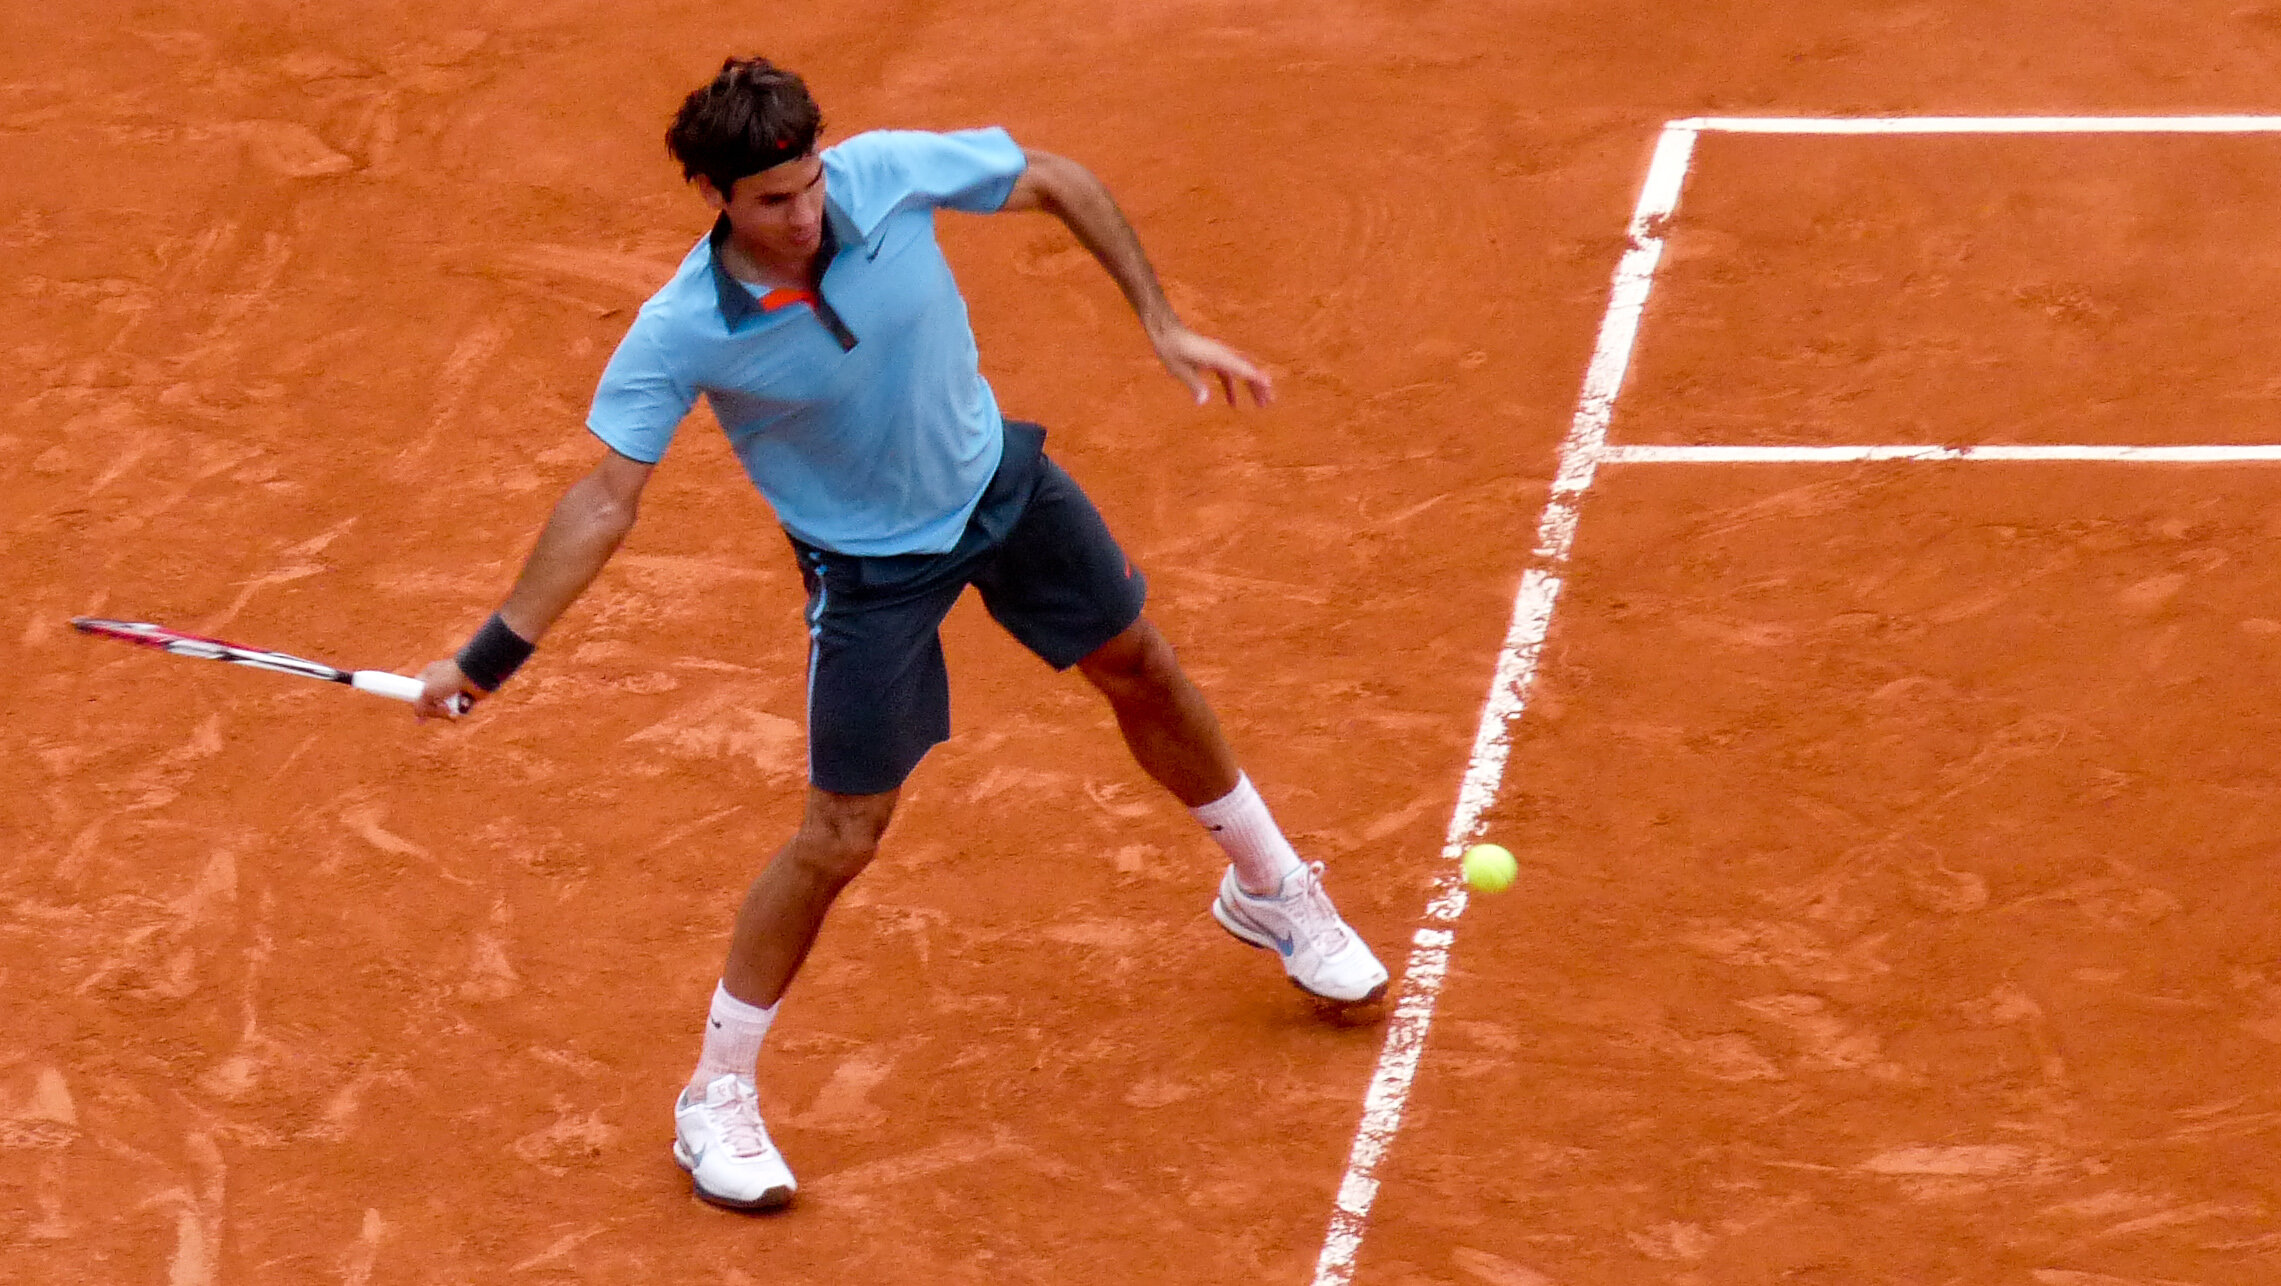 Federer’s forehand - All in the hips, wrist and follow through